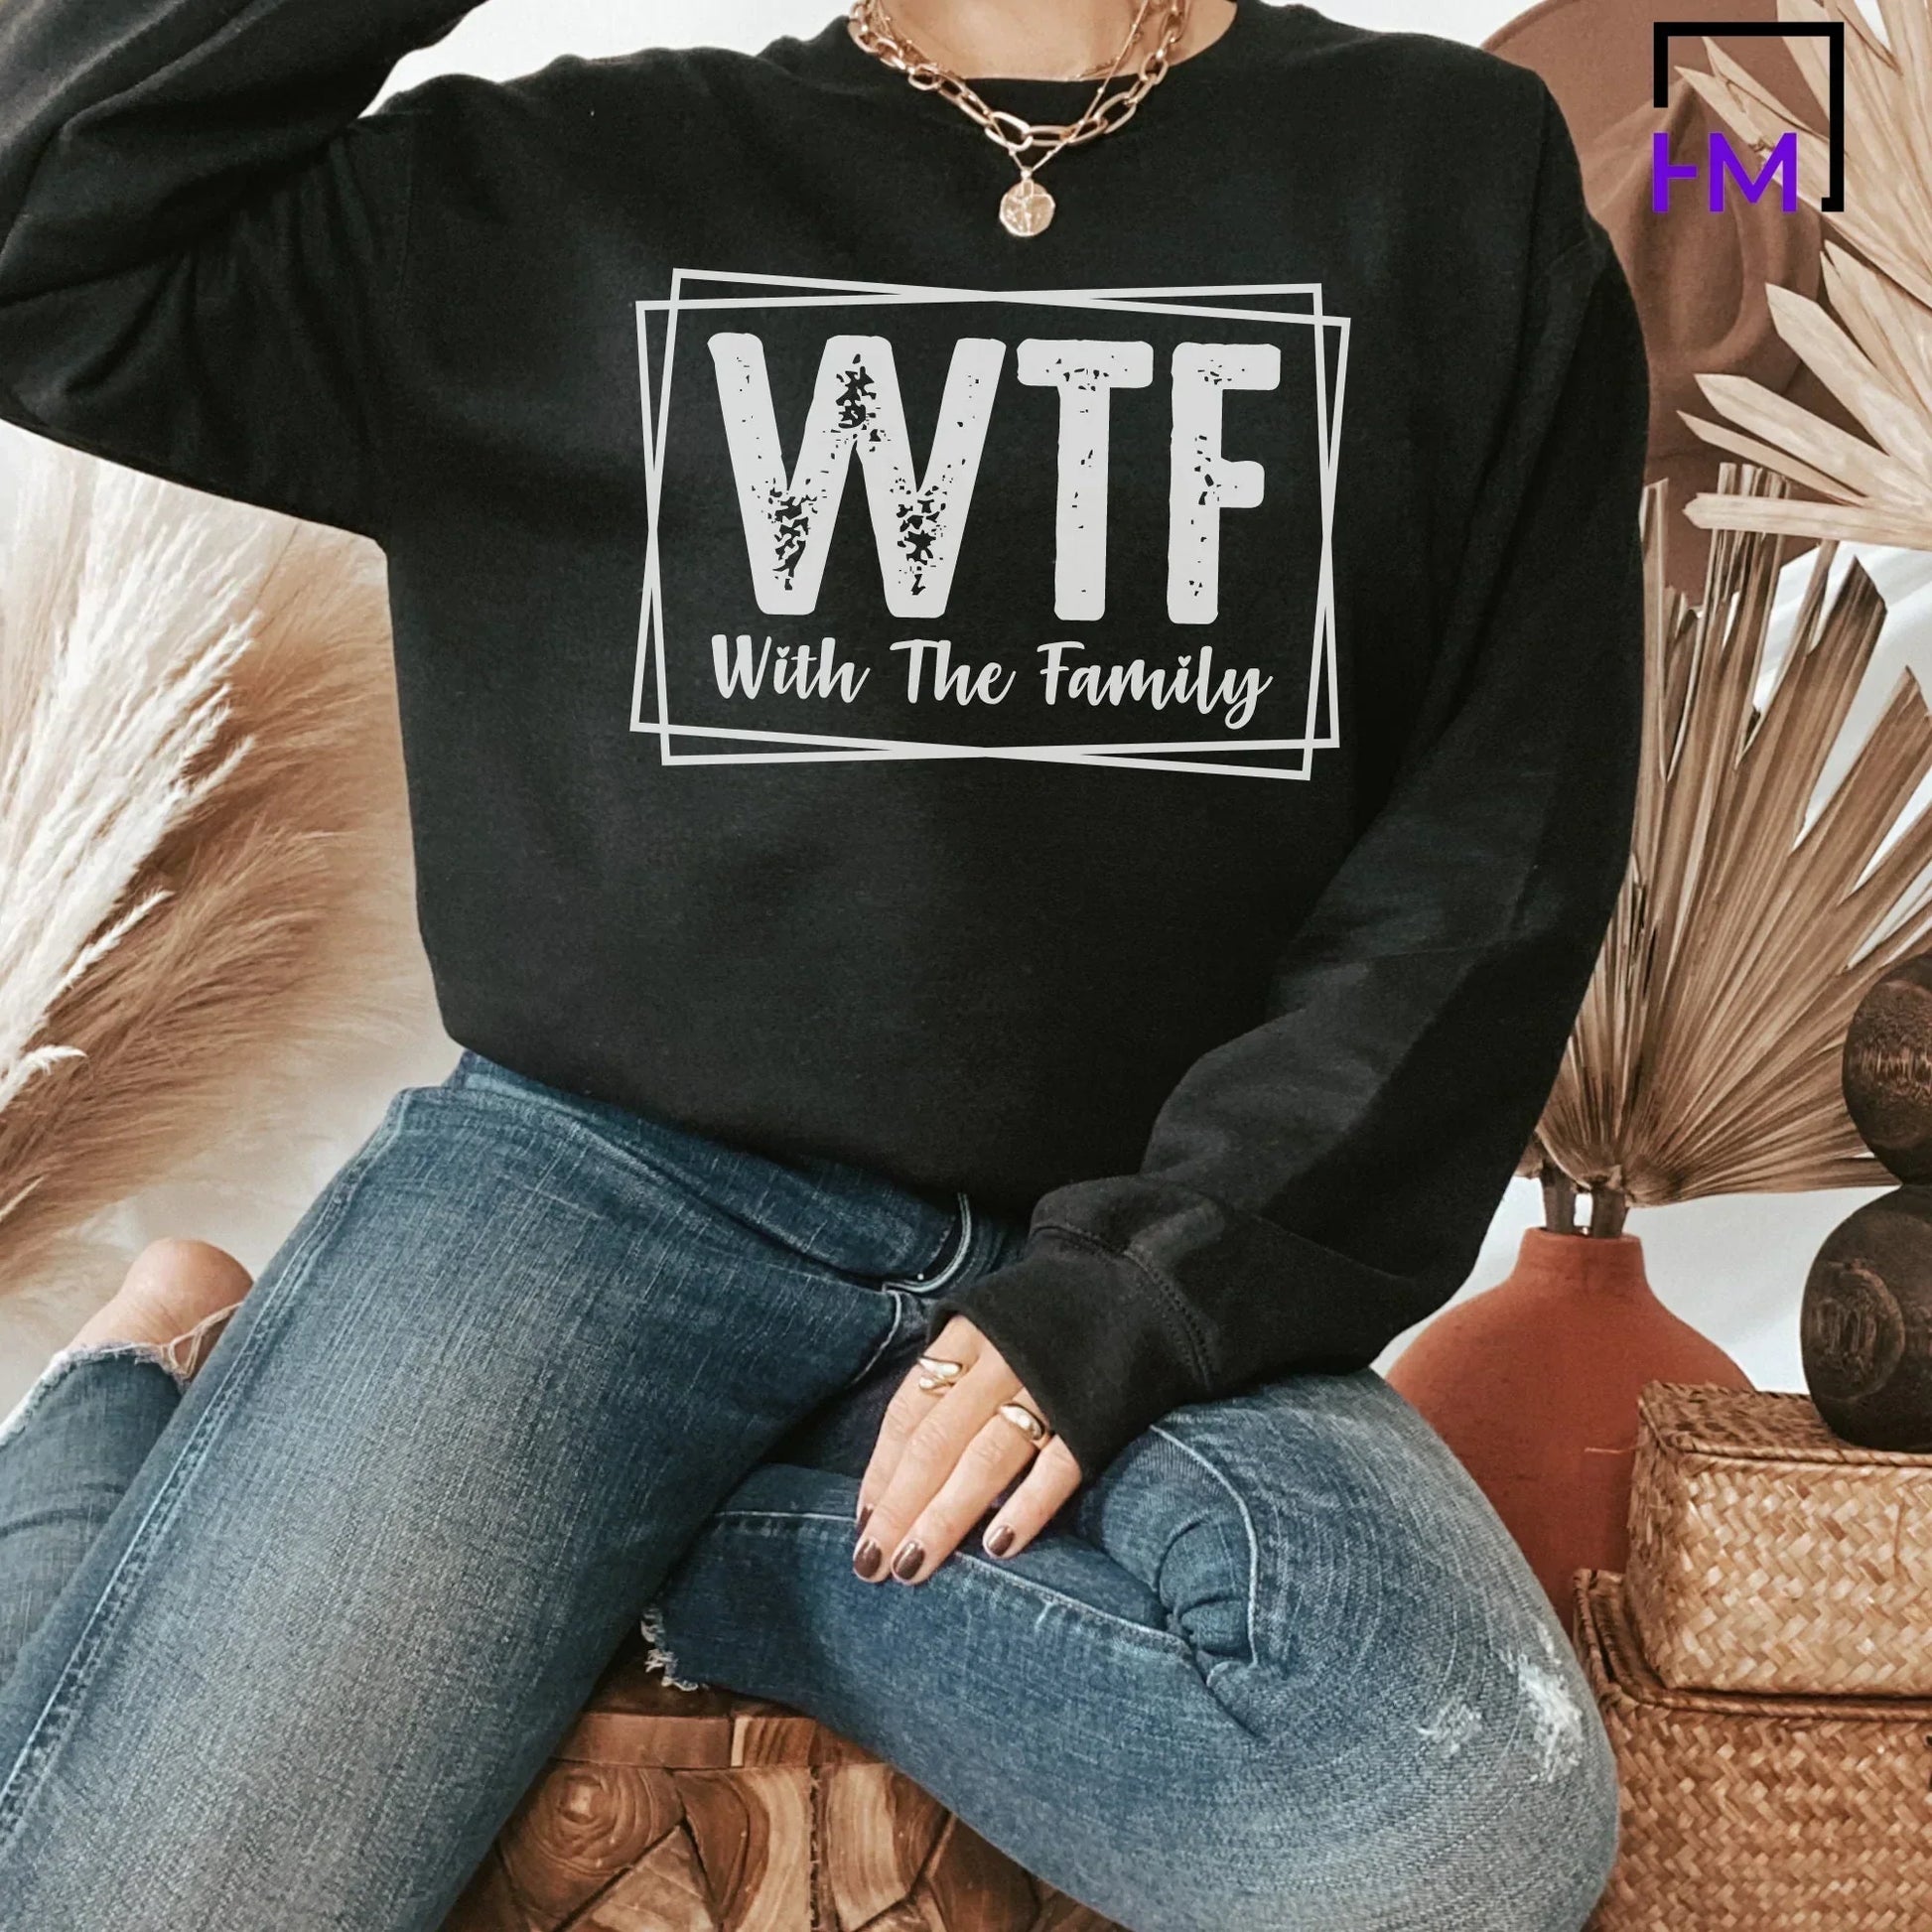 Family Vacation Shirt, WTF With the Family Shirts, Funny Family T-shirts, With the Family Shirts, Family Matching Shirt, Funny Family Shirts HMDesignStudioUS